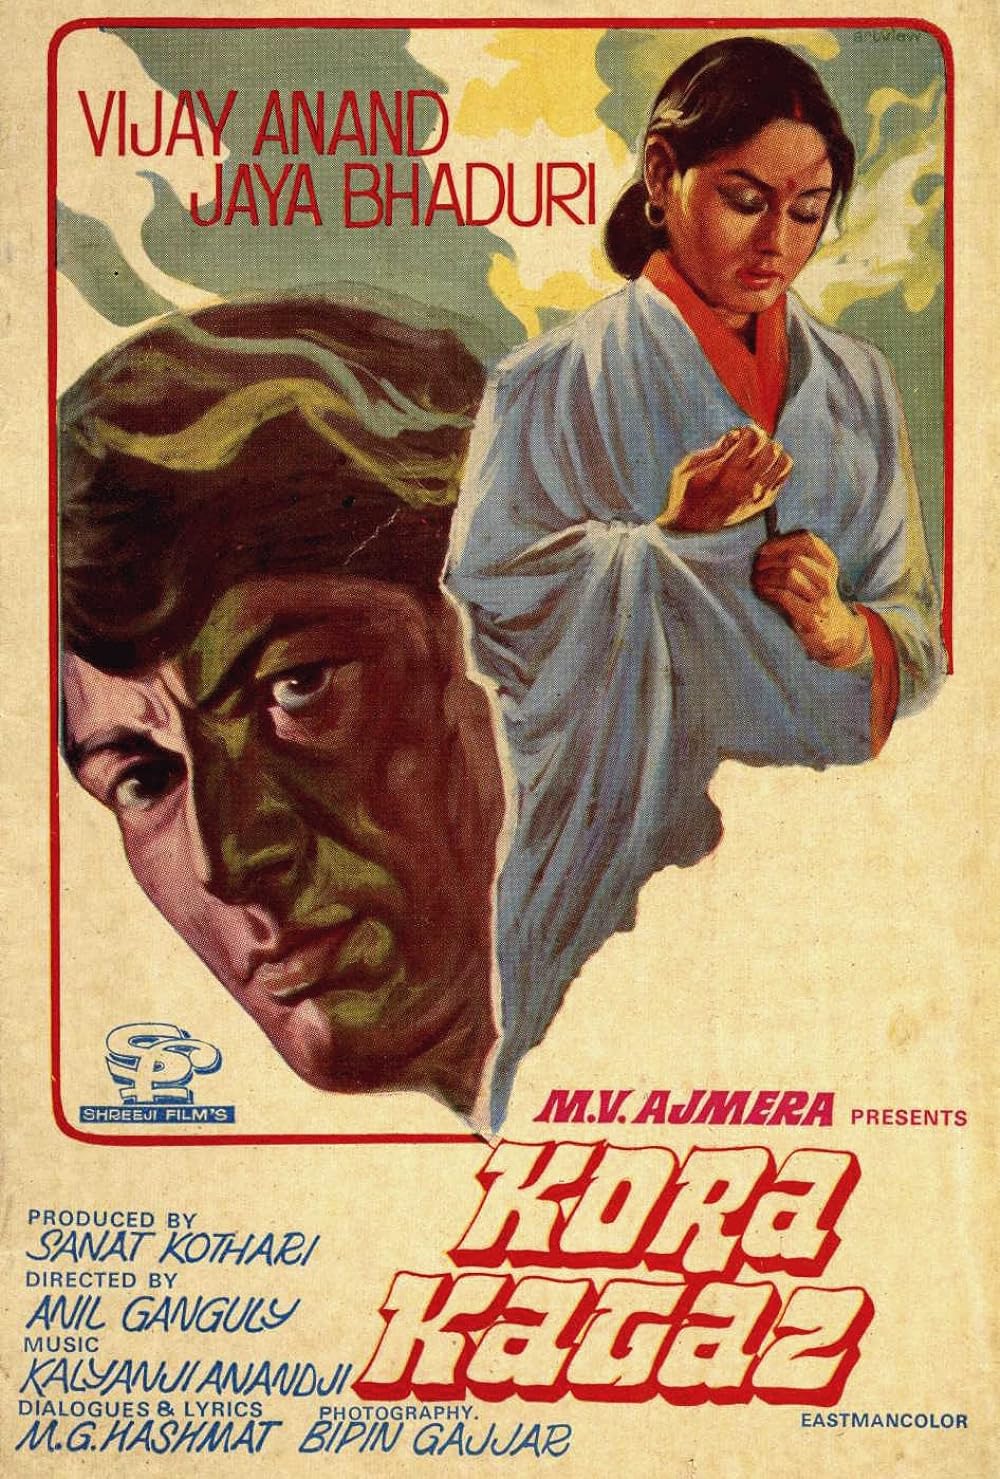 Kora Kagaz
Directed by Anil Ganguly, Jaya Bachchan shines as a resilient wife facing marital challenges alongside Vijay Anand. Her portrayal resonates with authenticity, capturing the complexities of relationships with subtlety